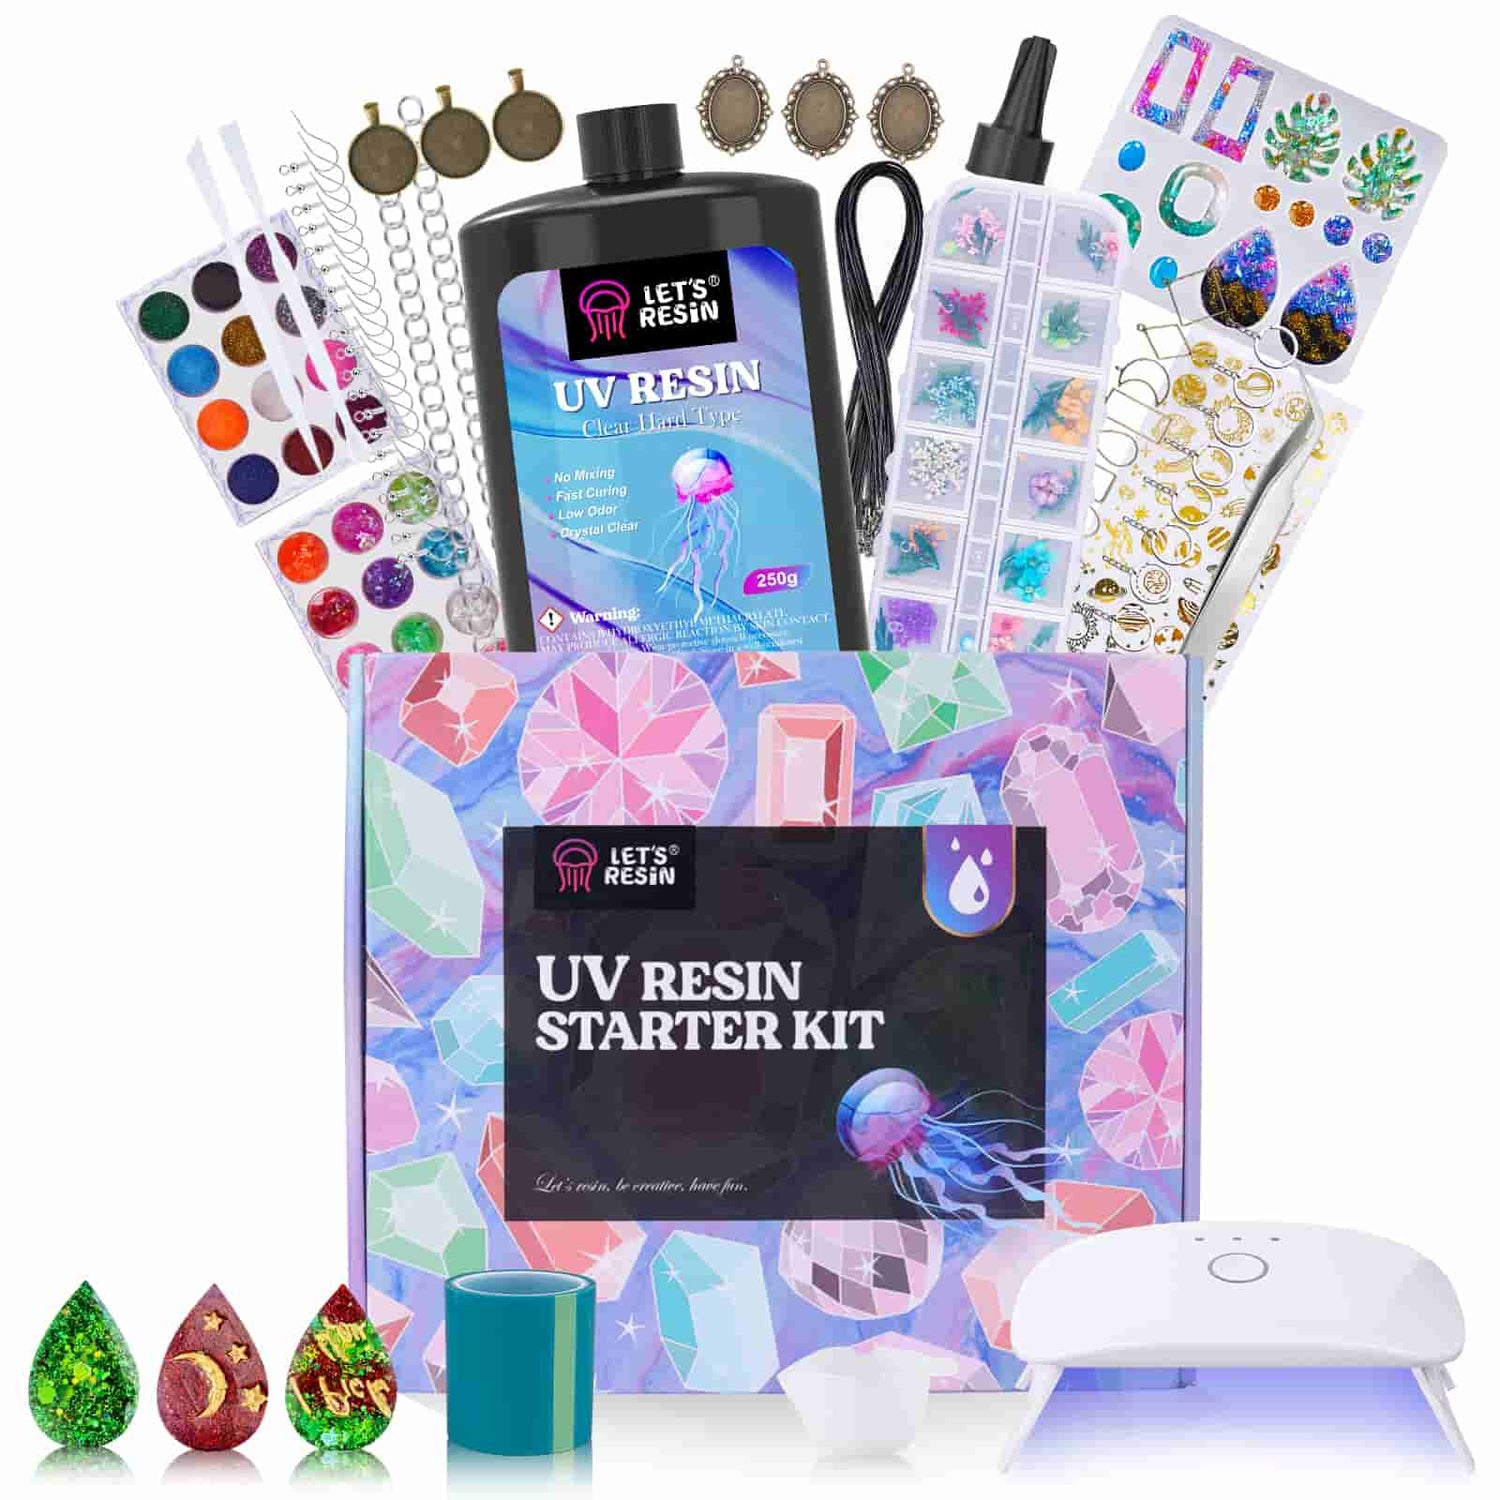 Jdiction UV Resin Kit With Light, Super Crystal Clear Hard Resin Sunlight  Curing UV Resin Starter Kit for Jewelry DIY Craft -  Finland